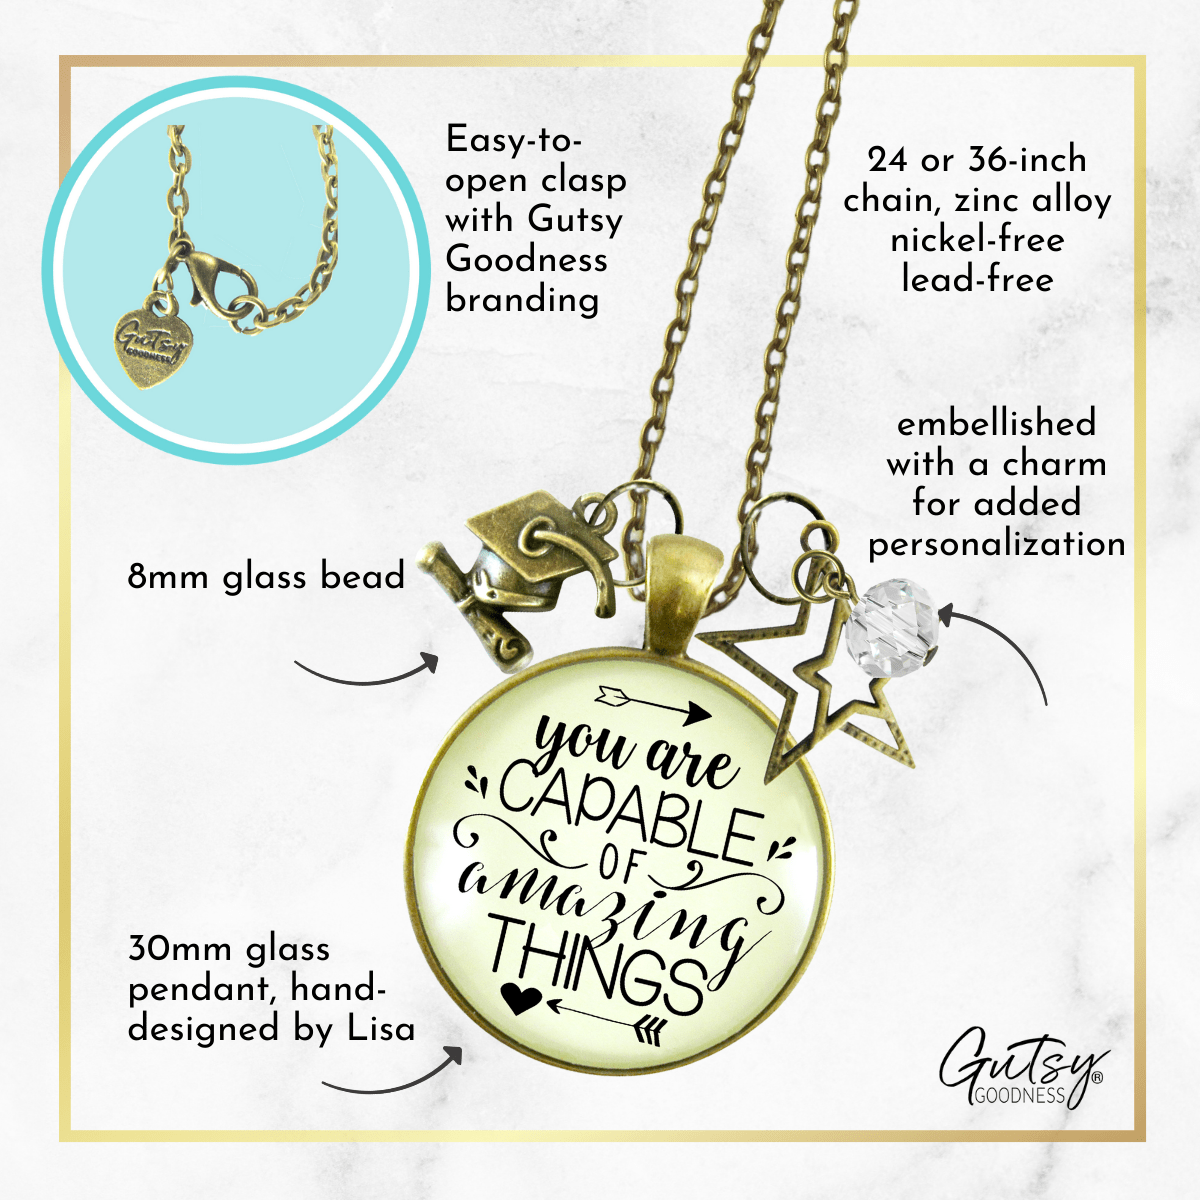 Gutsy Goodness Graduation Necklace You are Capable Of Amazing Things Womens Charm Jewelry - Gutsy Goodness Handmade Jewelry;Graduation Necklace You Are Capable Of Amazing Things Womens Charm Jewelry - Gutsy Goodness Handmade Jewelry Gifts